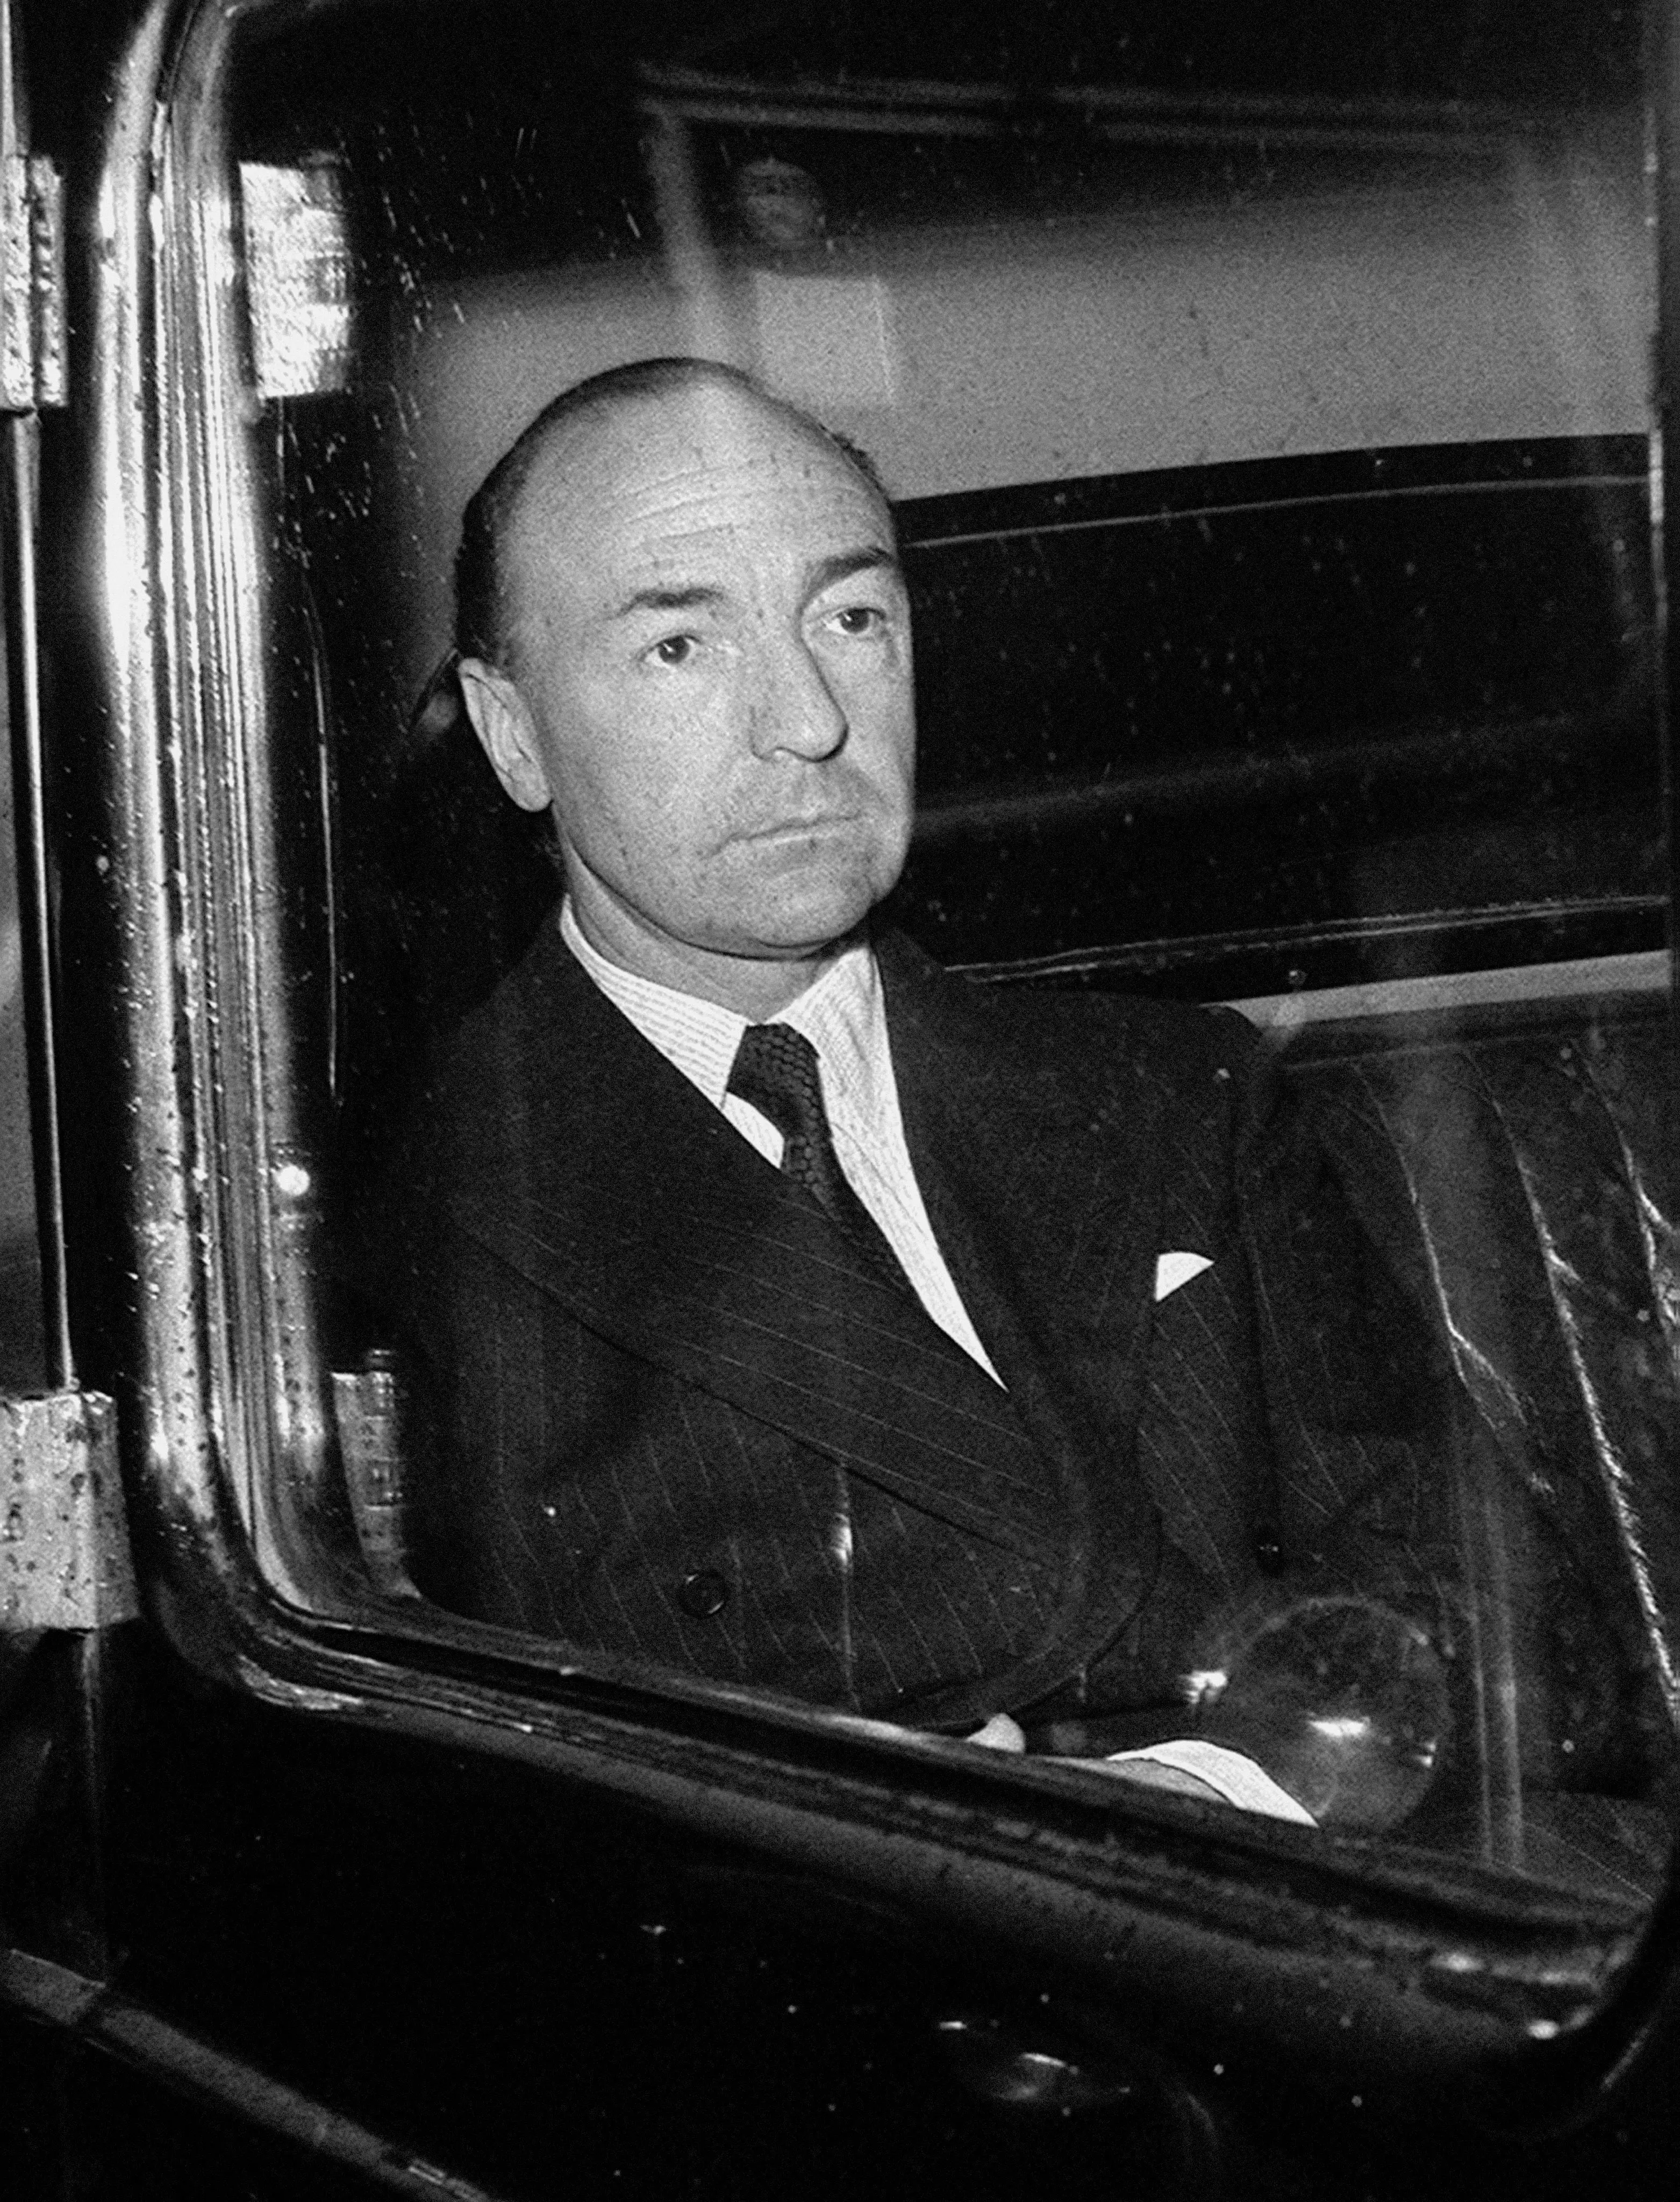 John Profumo was disgraced after his affair with Christine (